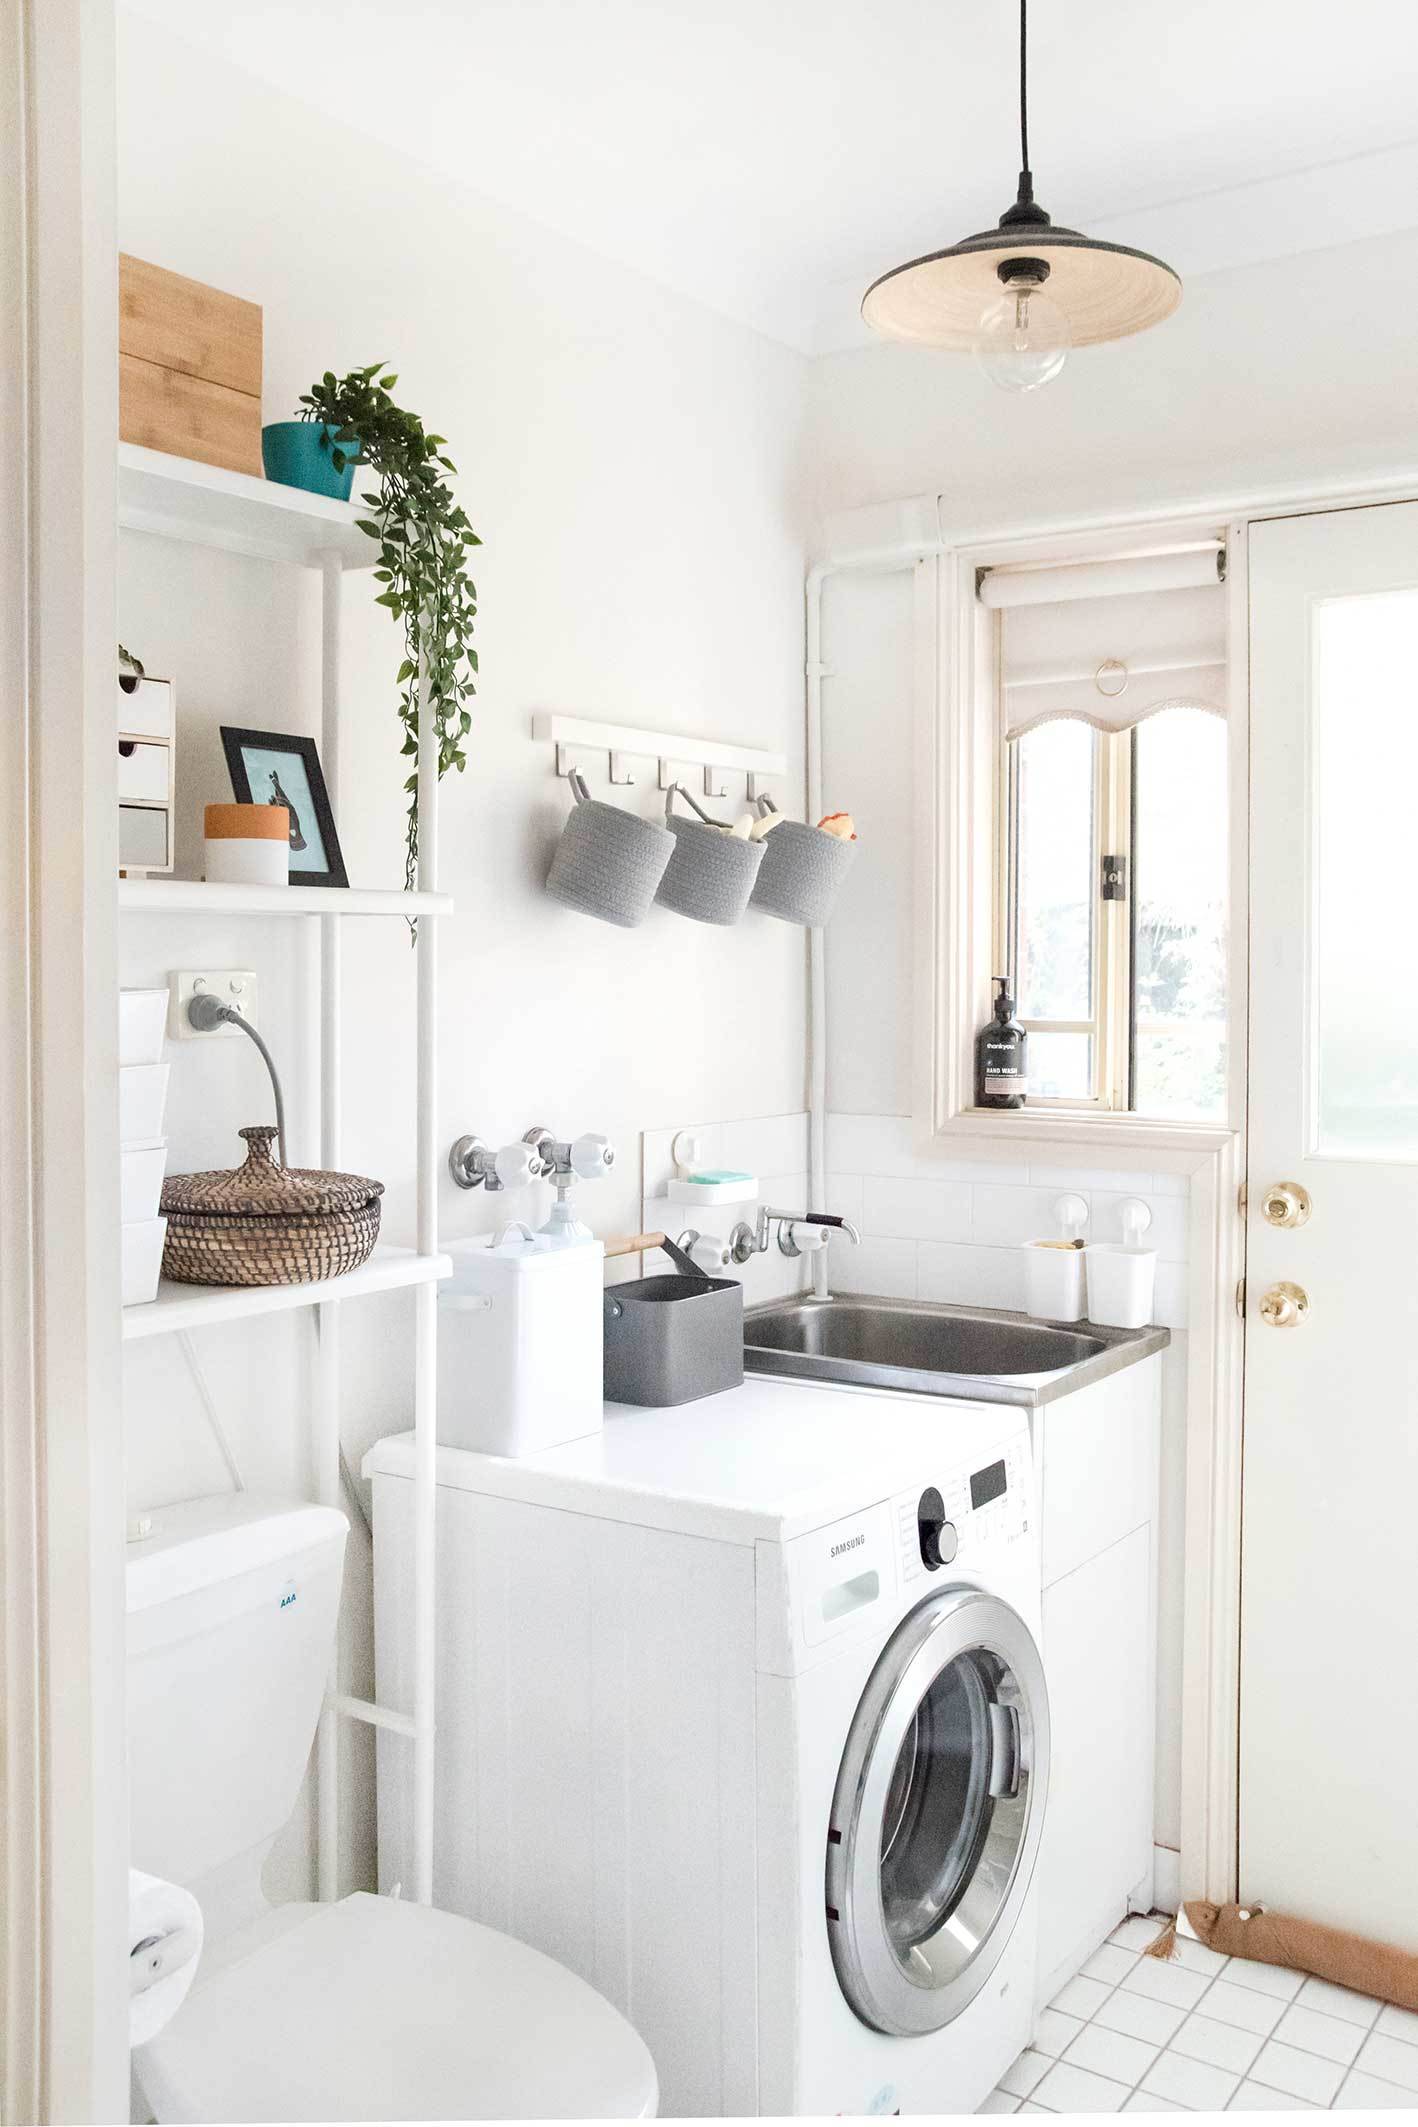 After we applied some easy laundry room storage ideas!